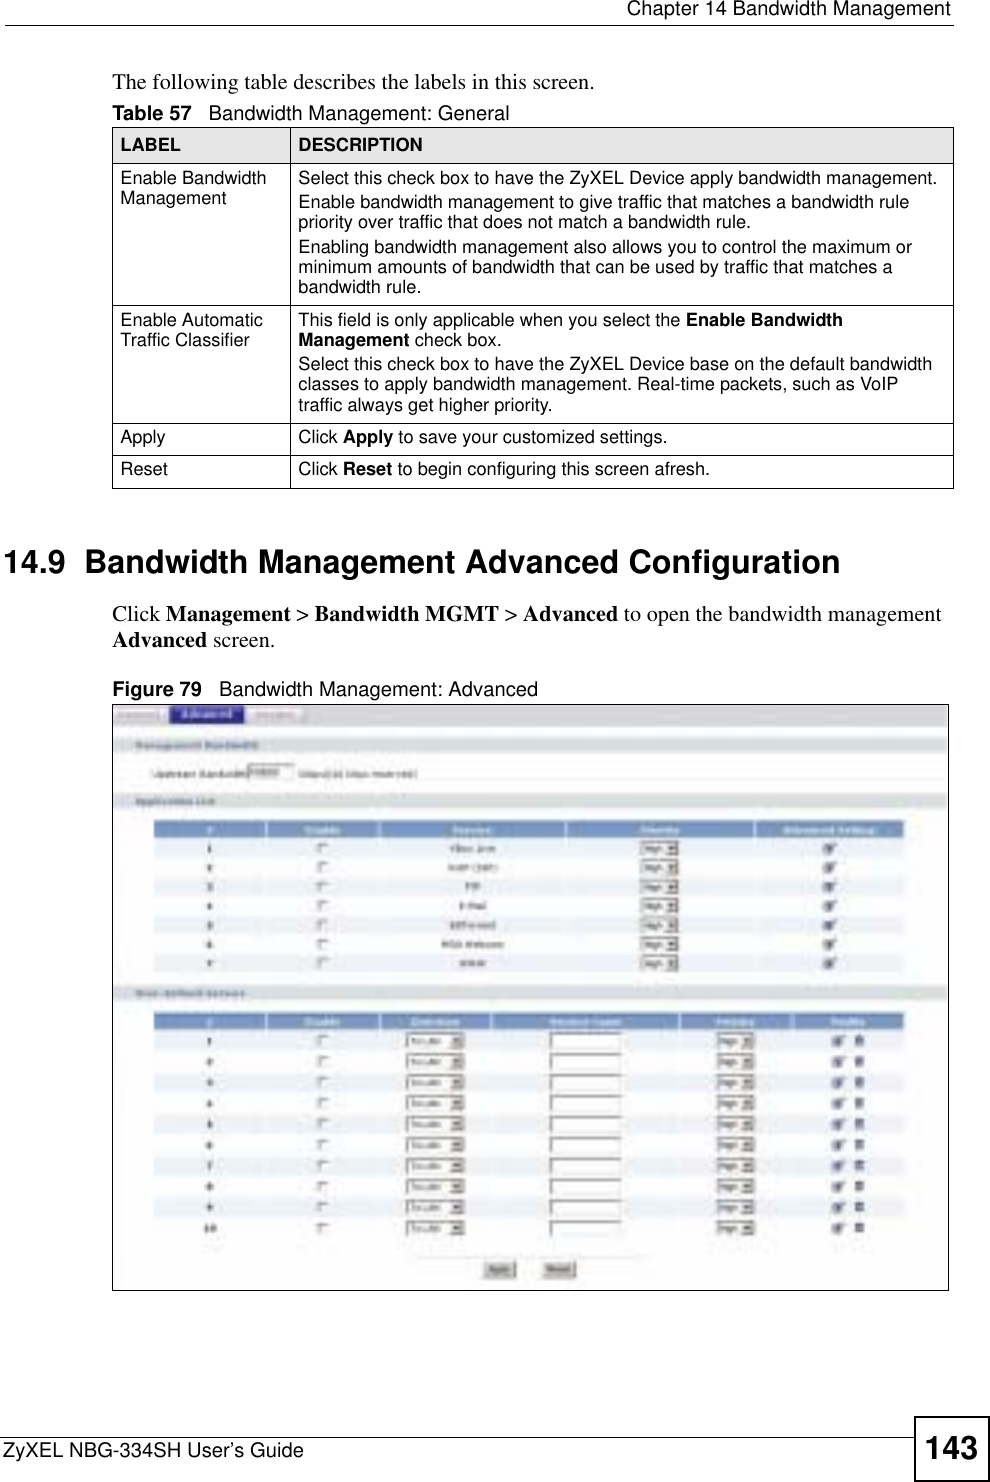  Chapter 14 Bandwidth ManagementZyXEL NBG-334SH User’s Guide 143The following table describes the labels in this screen.14.9  Bandwidth Management Advanced Configuration Click Management &gt; Bandwidth MGMT &gt; Advanced to open the bandwidth management Advanced screen.Figure 79   Bandwidth Management: AdvancedTable 57   Bandwidth Management: GeneralLABEL DESCRIPTIONEnable Bandwidth Management  Select this check box to have the ZyXEL Device apply bandwidth management. Enable bandwidth management to give traffic that matches a bandwidth rule priority over traffic that does not match a bandwidth rule. Enabling bandwidth management also allows you to control the maximum or minimum amounts of bandwidth that can be used by traffic that matches a bandwidth rule. Enable Automatic Traffic Classifier  This field is only applicable when you select the Enable Bandwidth Management check box.Select this check box to have the ZyXEL Device base on the default bandwidth classes to apply bandwidth management. Real-time packets, such as VoIP traffic always get higher priority.Apply Click Apply to save your customized settings.Reset Click Reset to begin configuring this screen afresh.